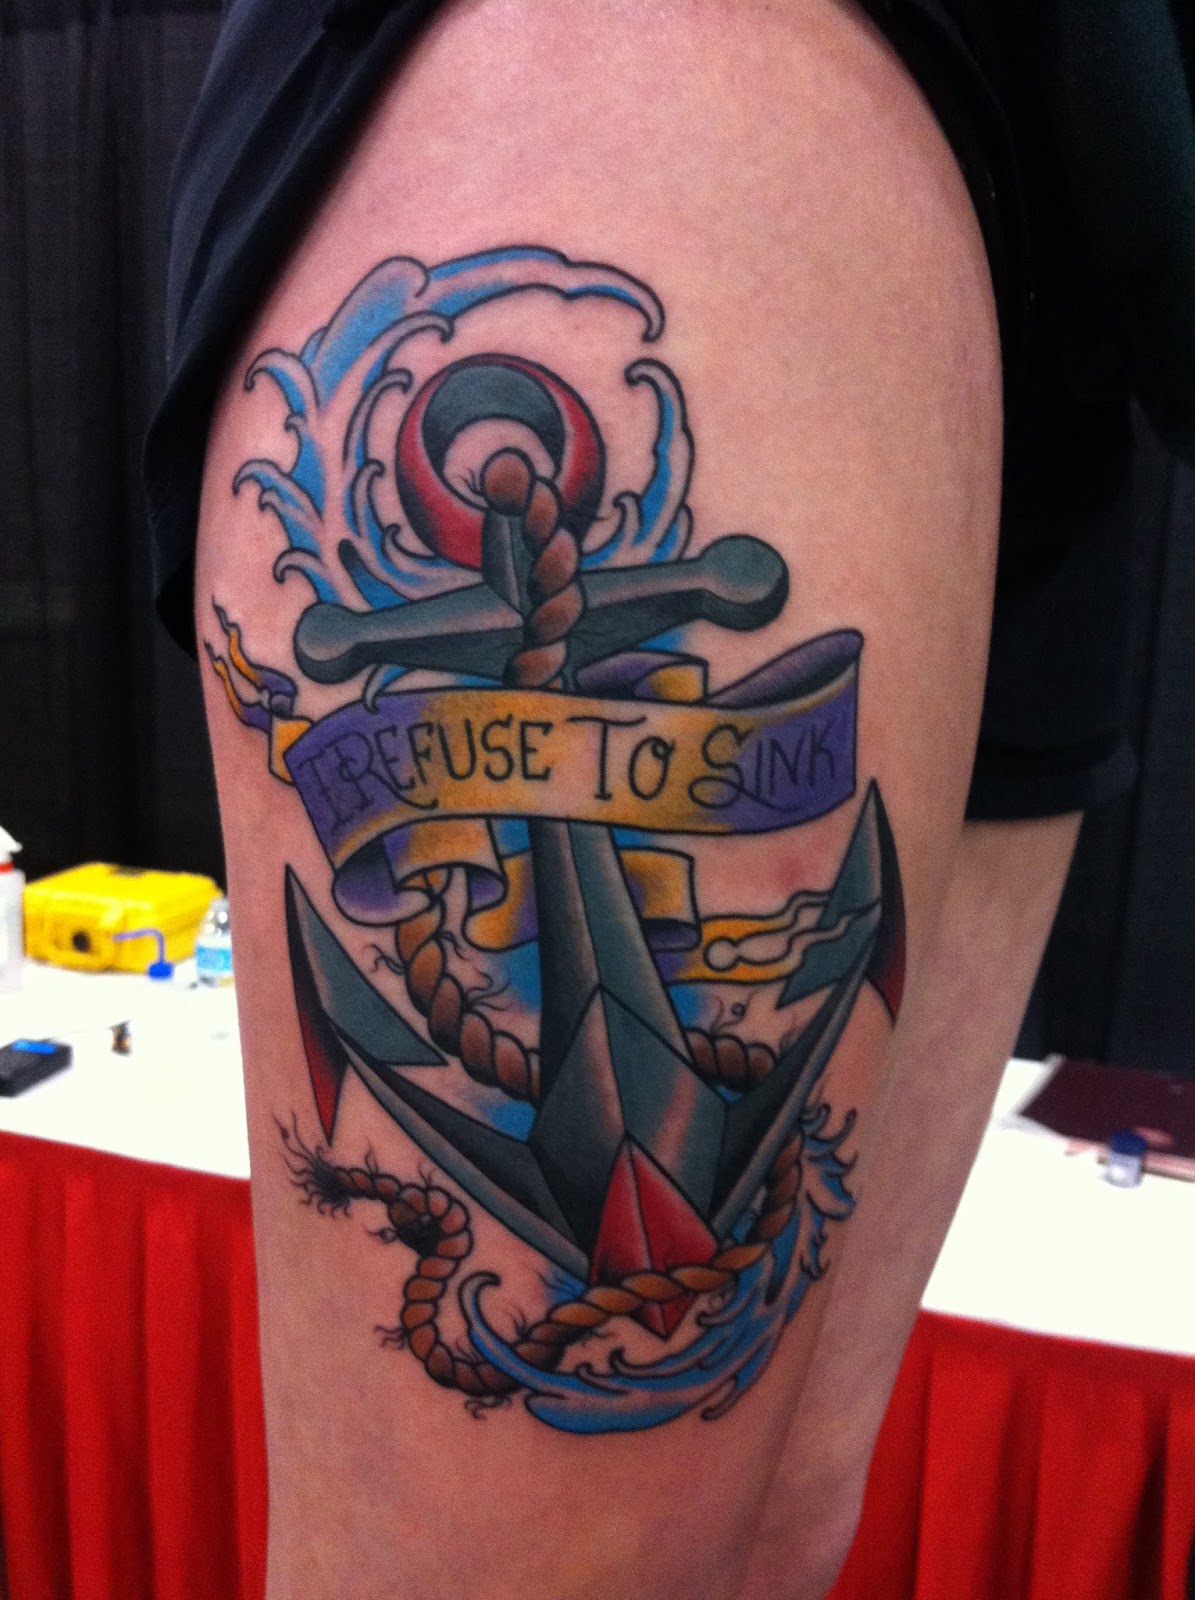 Check Out the Huge Mistake Thousands of Clients Make Getting Anchor Tattoos